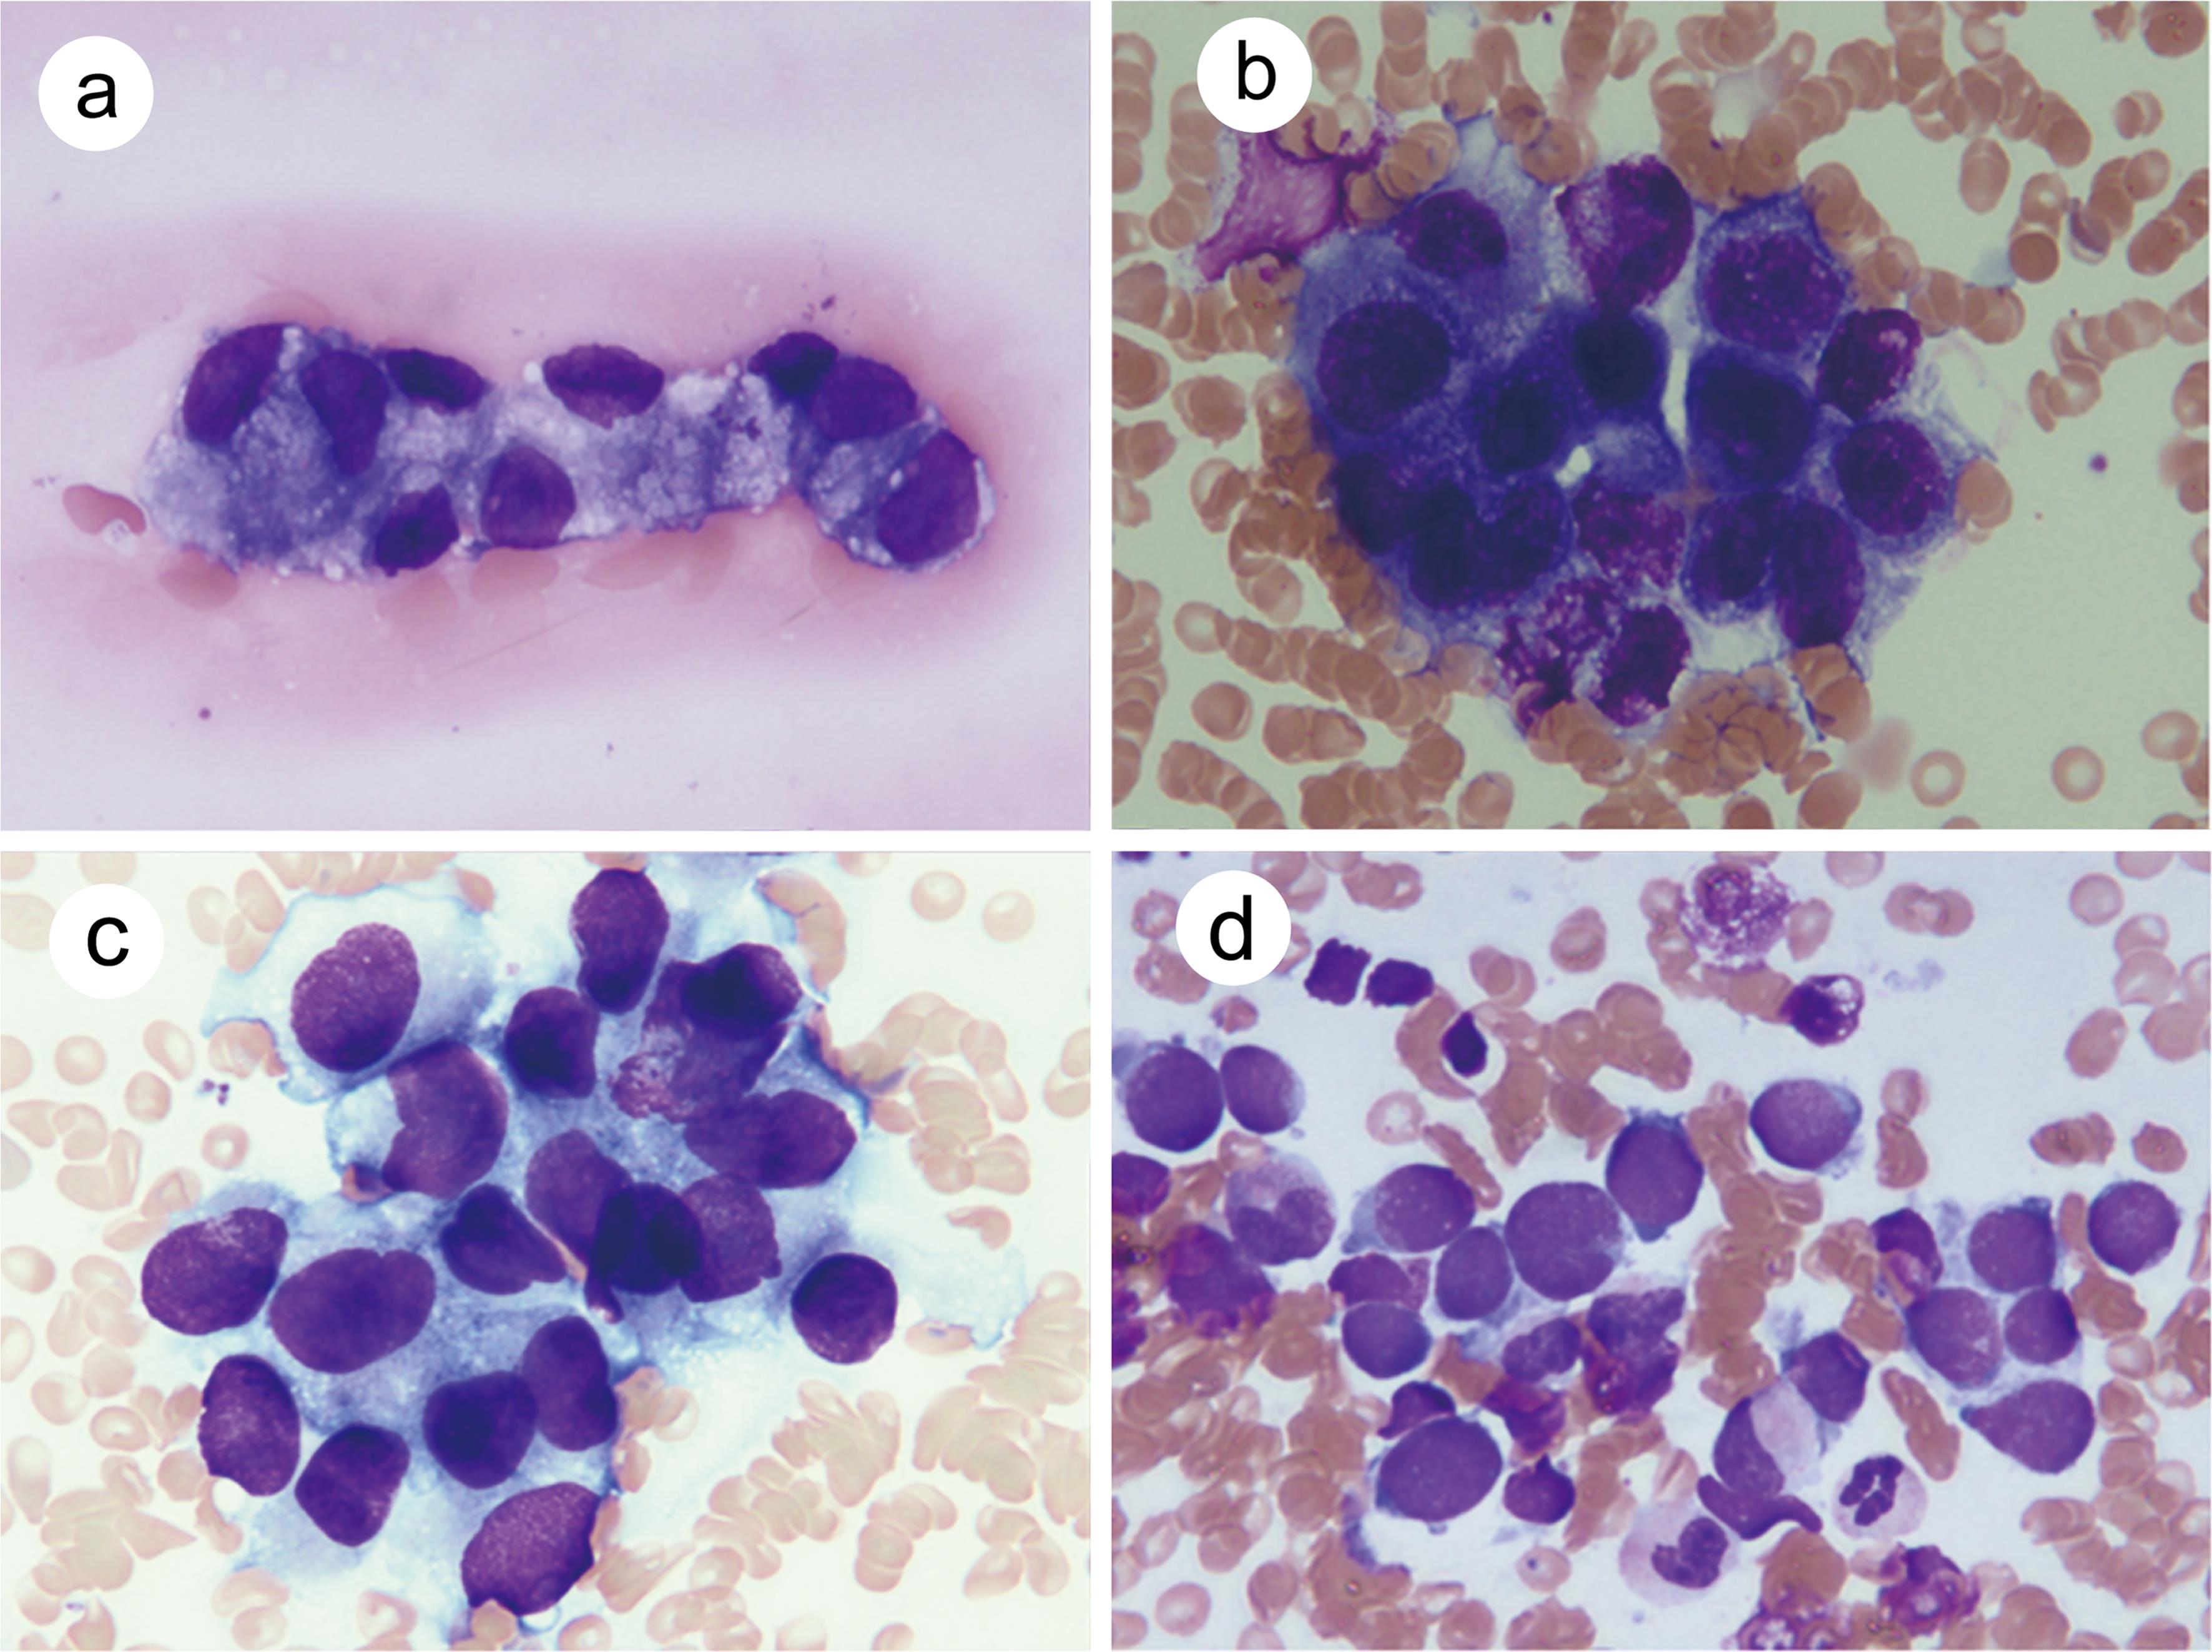 Bone marrow smear was used to detect (a) Case 3, adenocarcinoma of gastric carcinoma; (b) Case 4, adenocarcinoma of gastric carcinoma; (c) Case 7, urothelial carcinoma; and (d) small cell carcinoma of the lung (May Giemsa stain; original magnification, ×1,000).